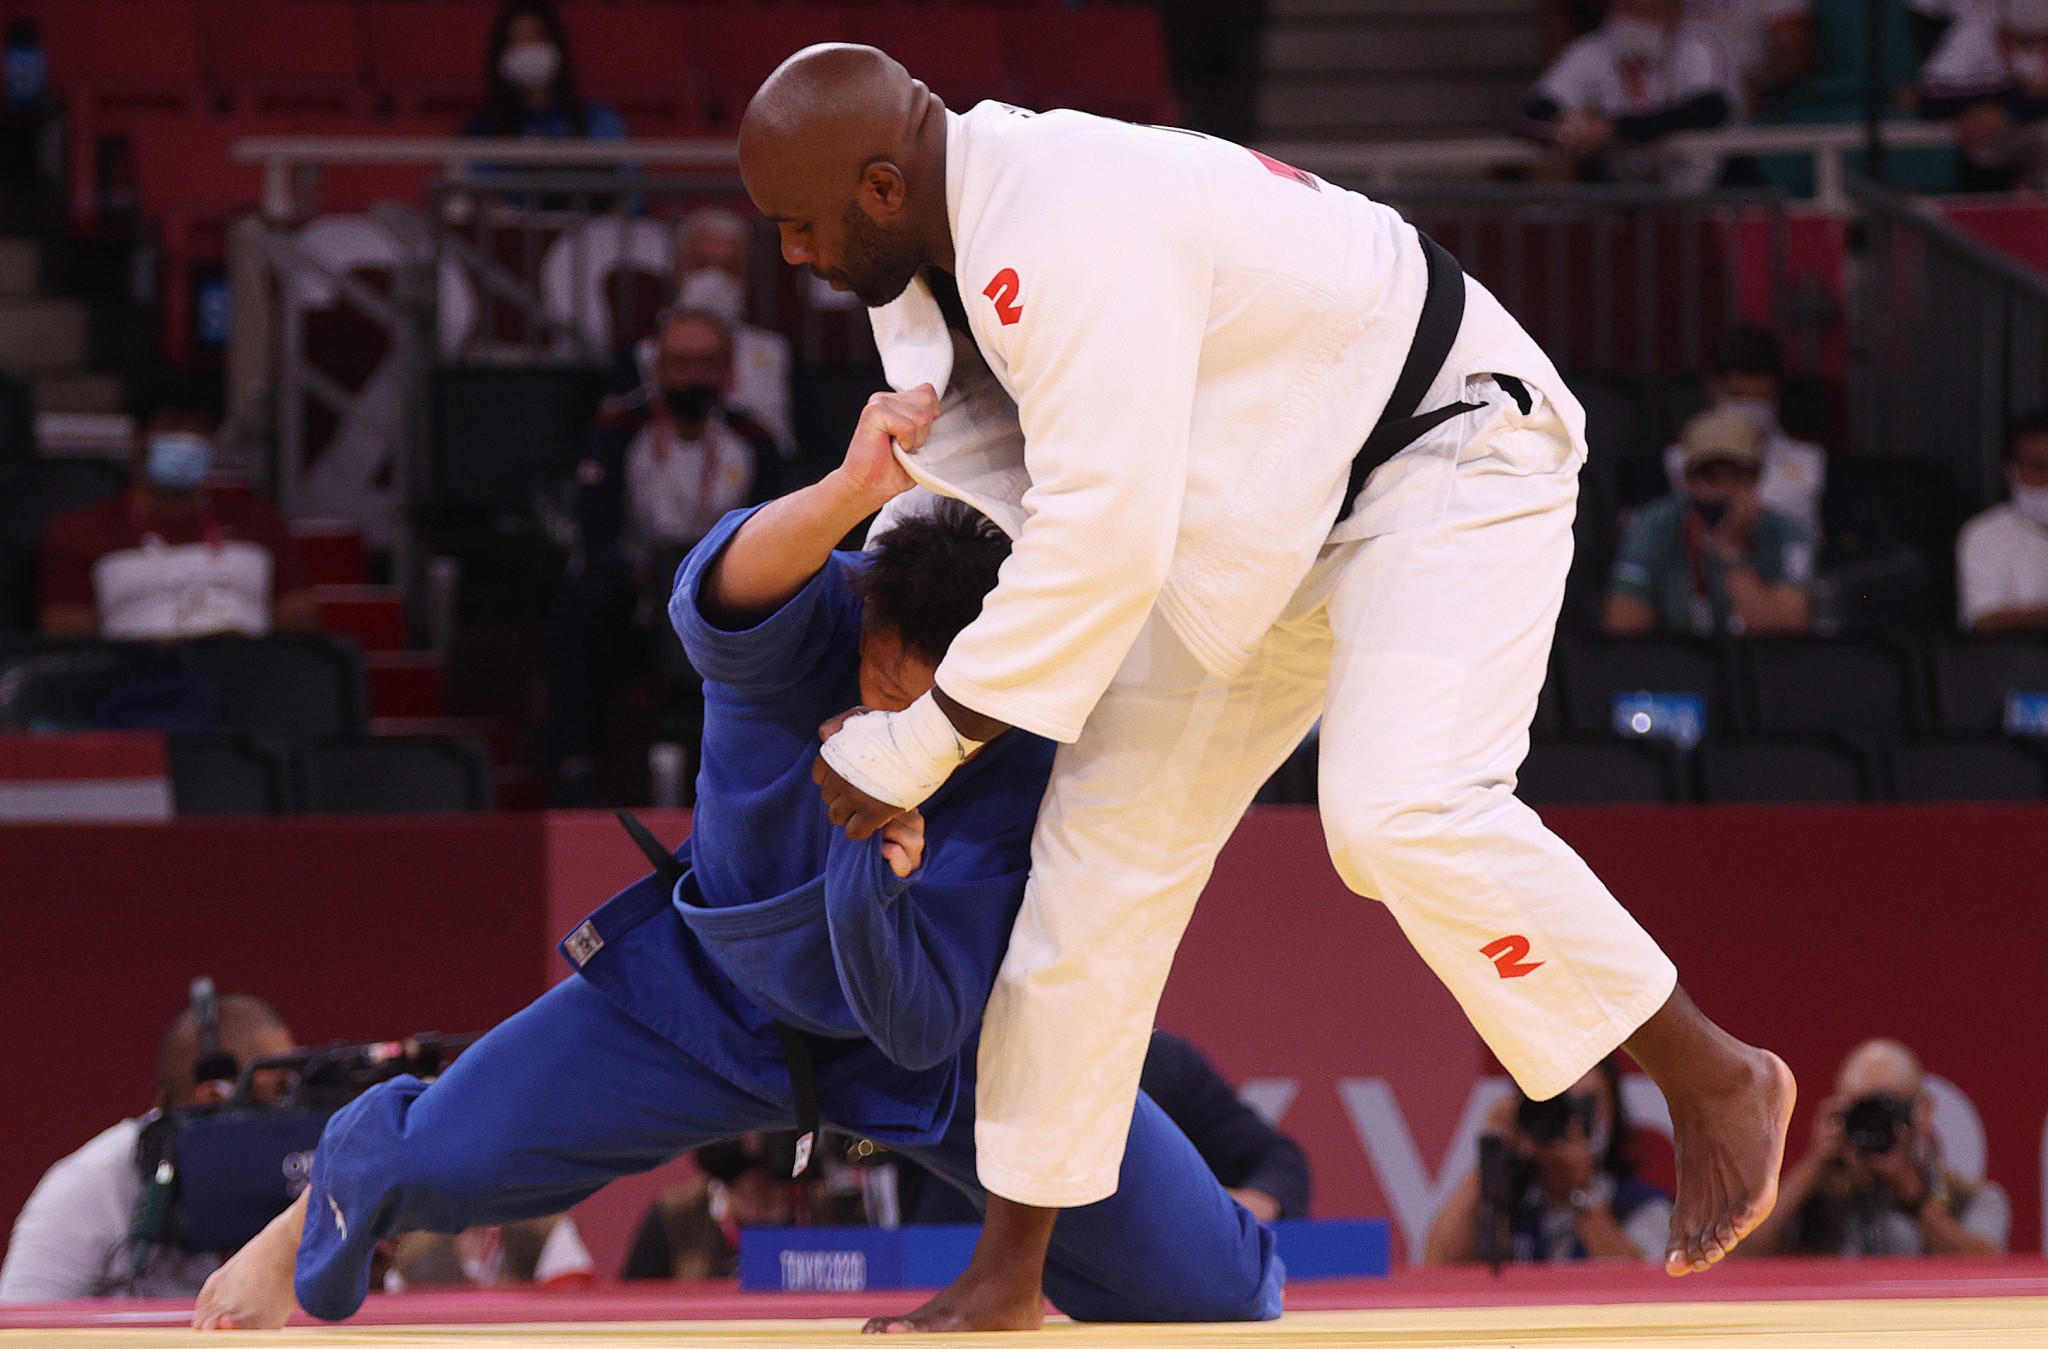 Teddy Riner, right, opted not to compete at the 2022 World Judo Championships due to an ankle injury ©Getty Images